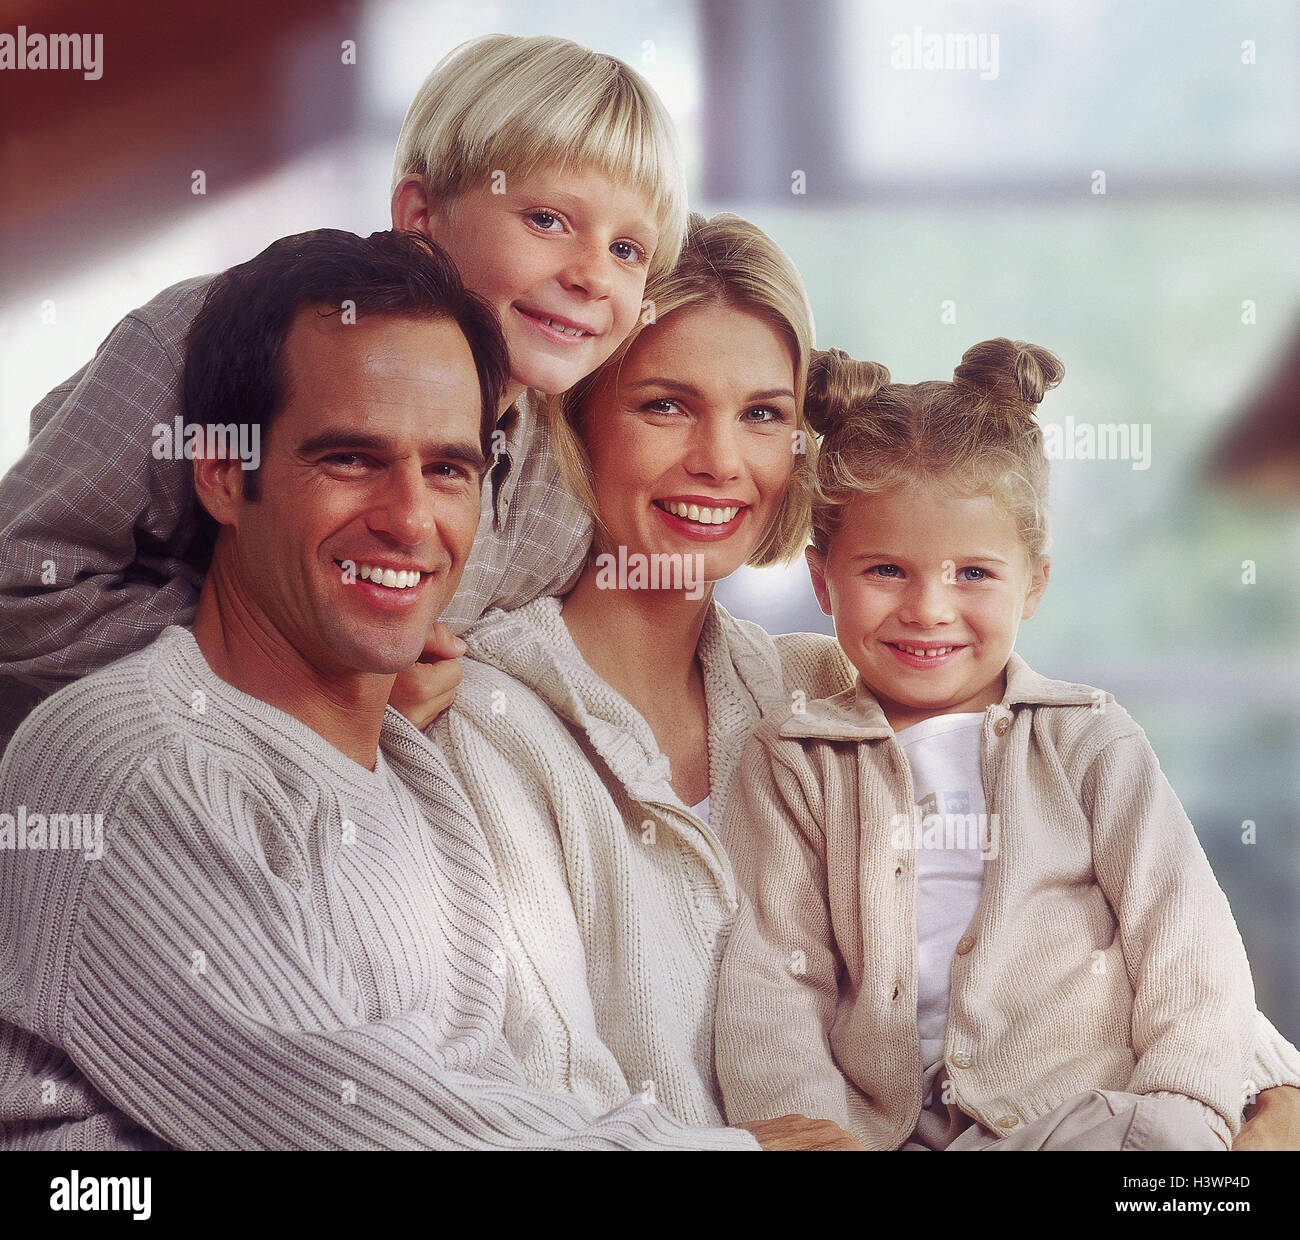 Family, laugh, group picture Families, couple, man, woman, parents, children, two, boy, girl, son, subsidiary, siblings, clothes, colour shade, immediately, beige, embrace, side by side, one after the other, happy, inside, near, Stock Photo